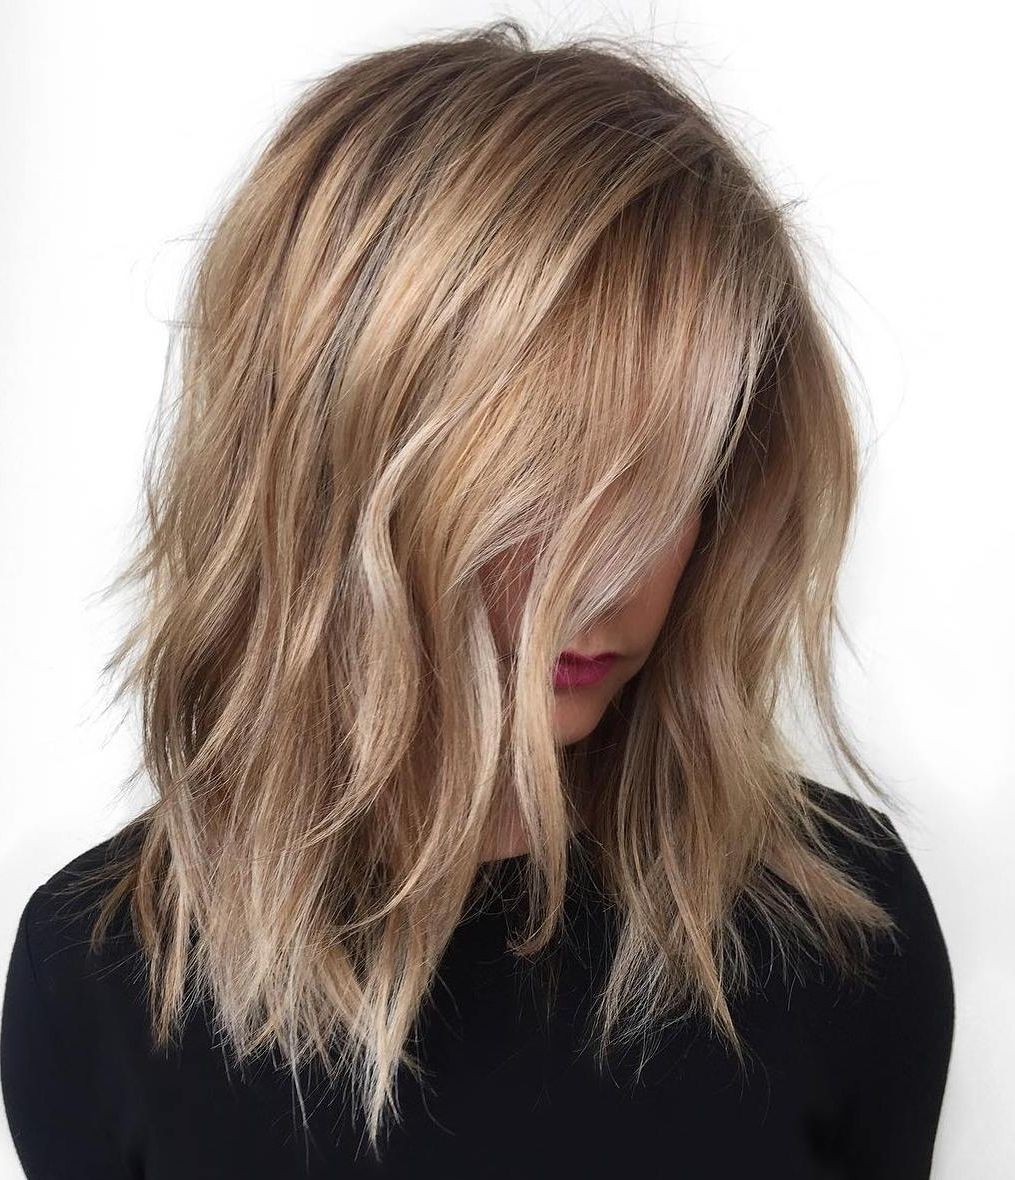 40 Styles With Medium Blonde Hair For Major Inspiration Regarding Famous Multi Tonal Mid Length Blonde Hairstyles (View 5 of 20)